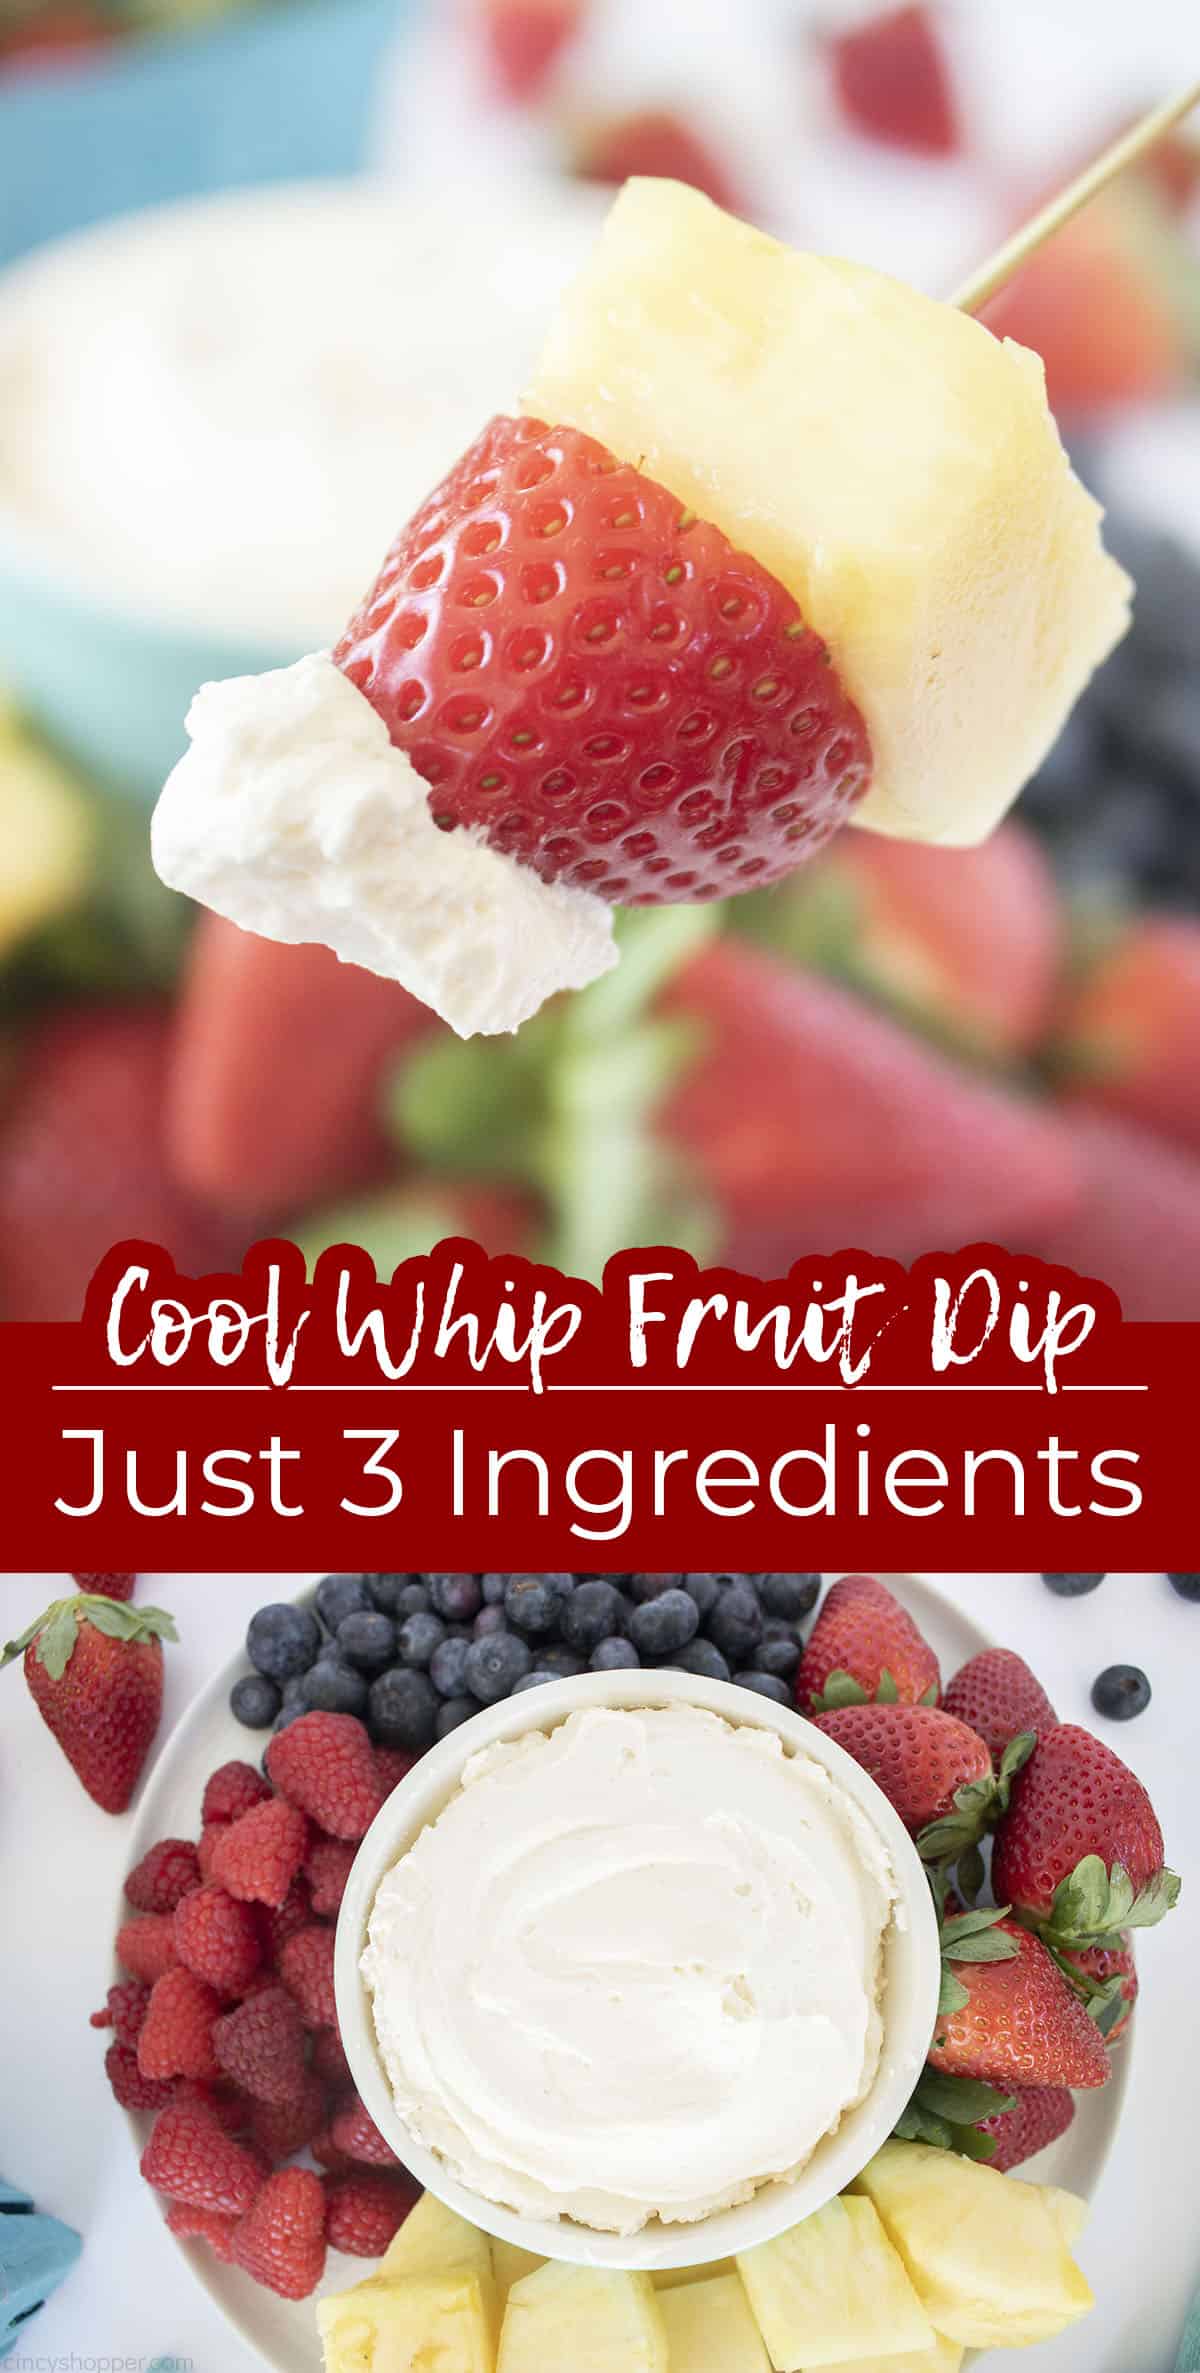 Long pin with Text Cool Whip Fruit Dip just 3 ingredients.